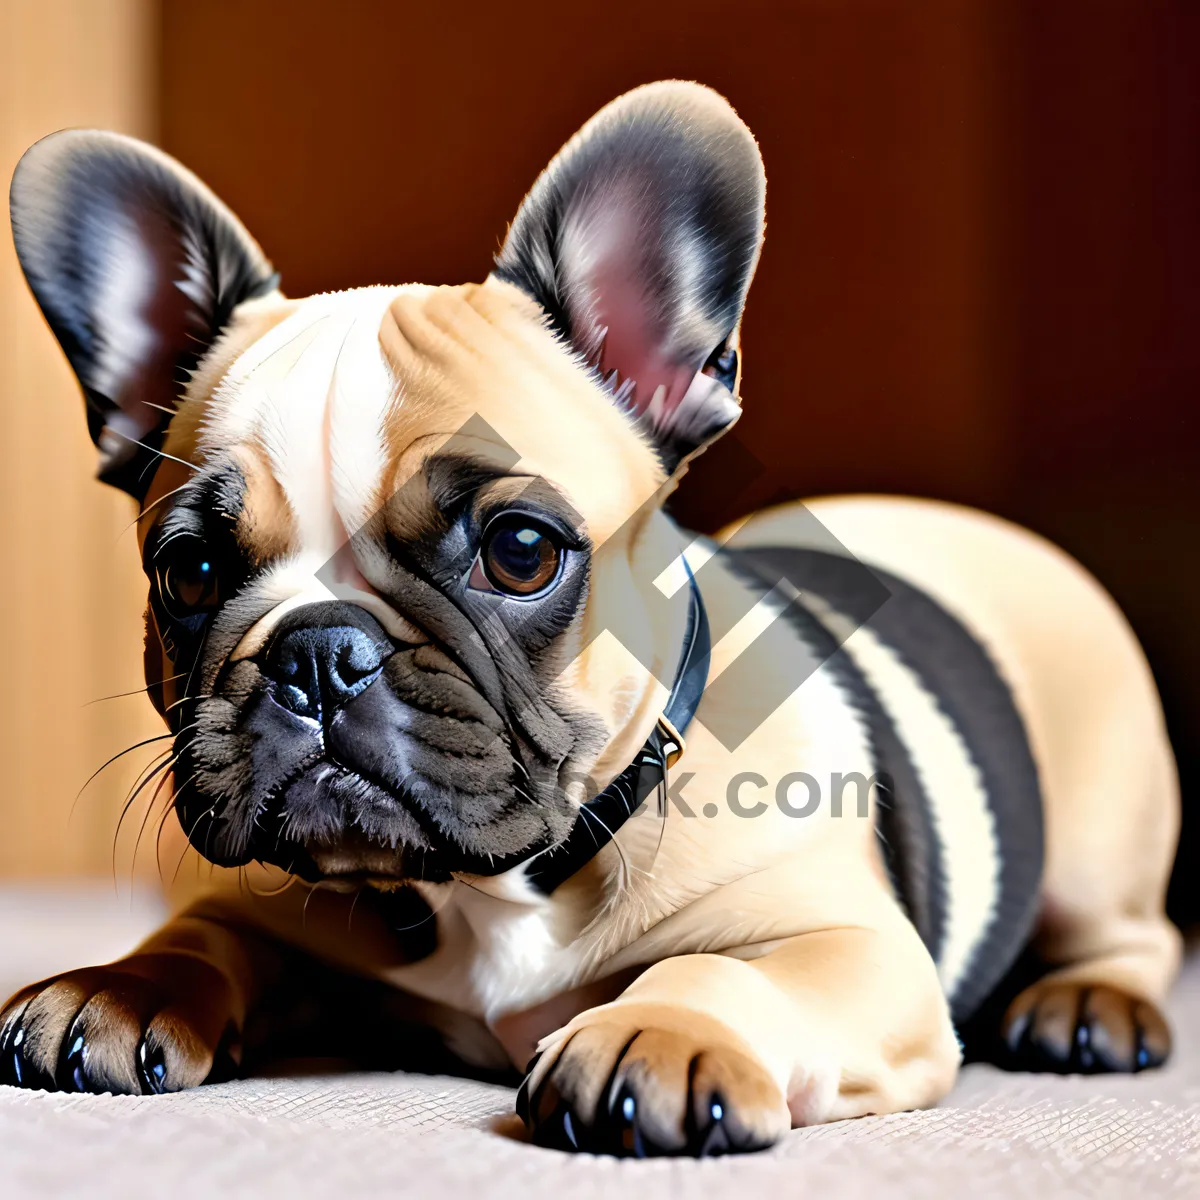 Picture of Bulldog puppy: Adorable, wrinkled, purebred canine companion